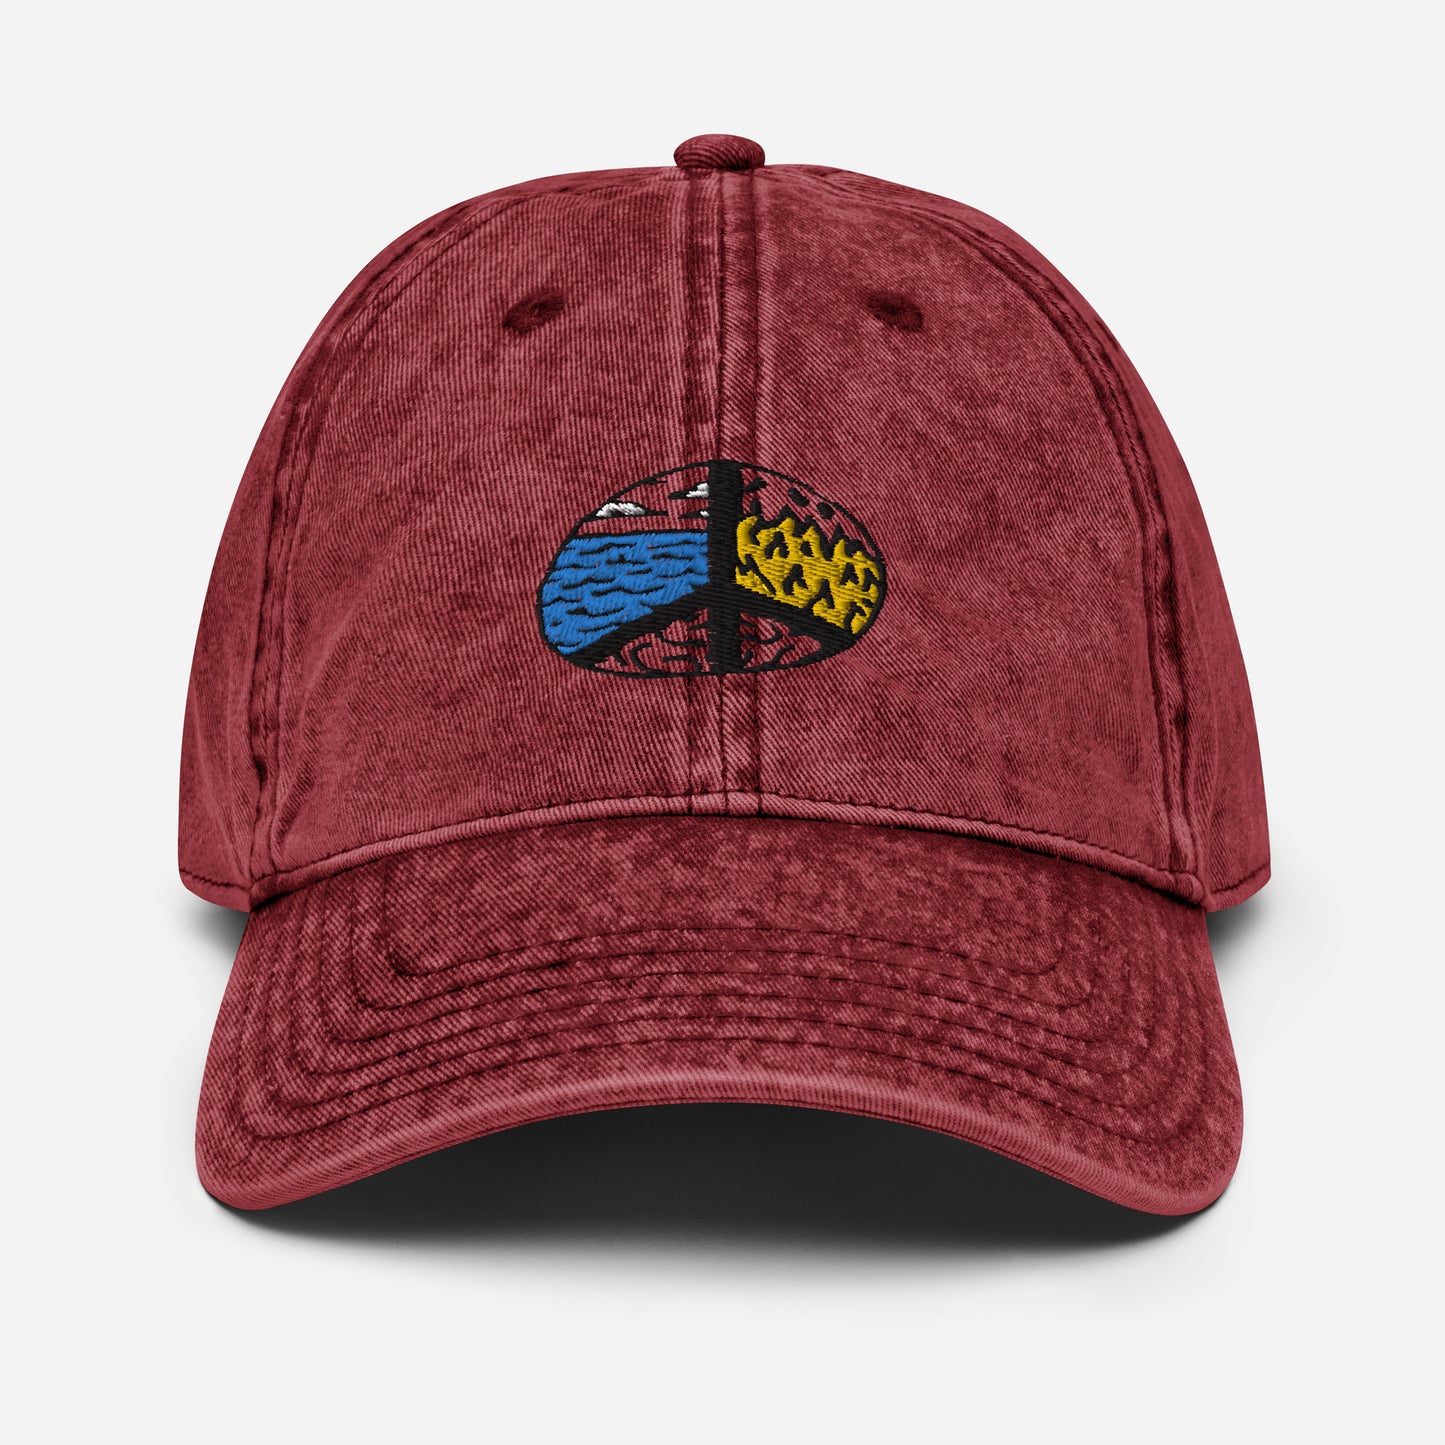 "Peaceful" Embroidered Vintage Cotton Twill Cap